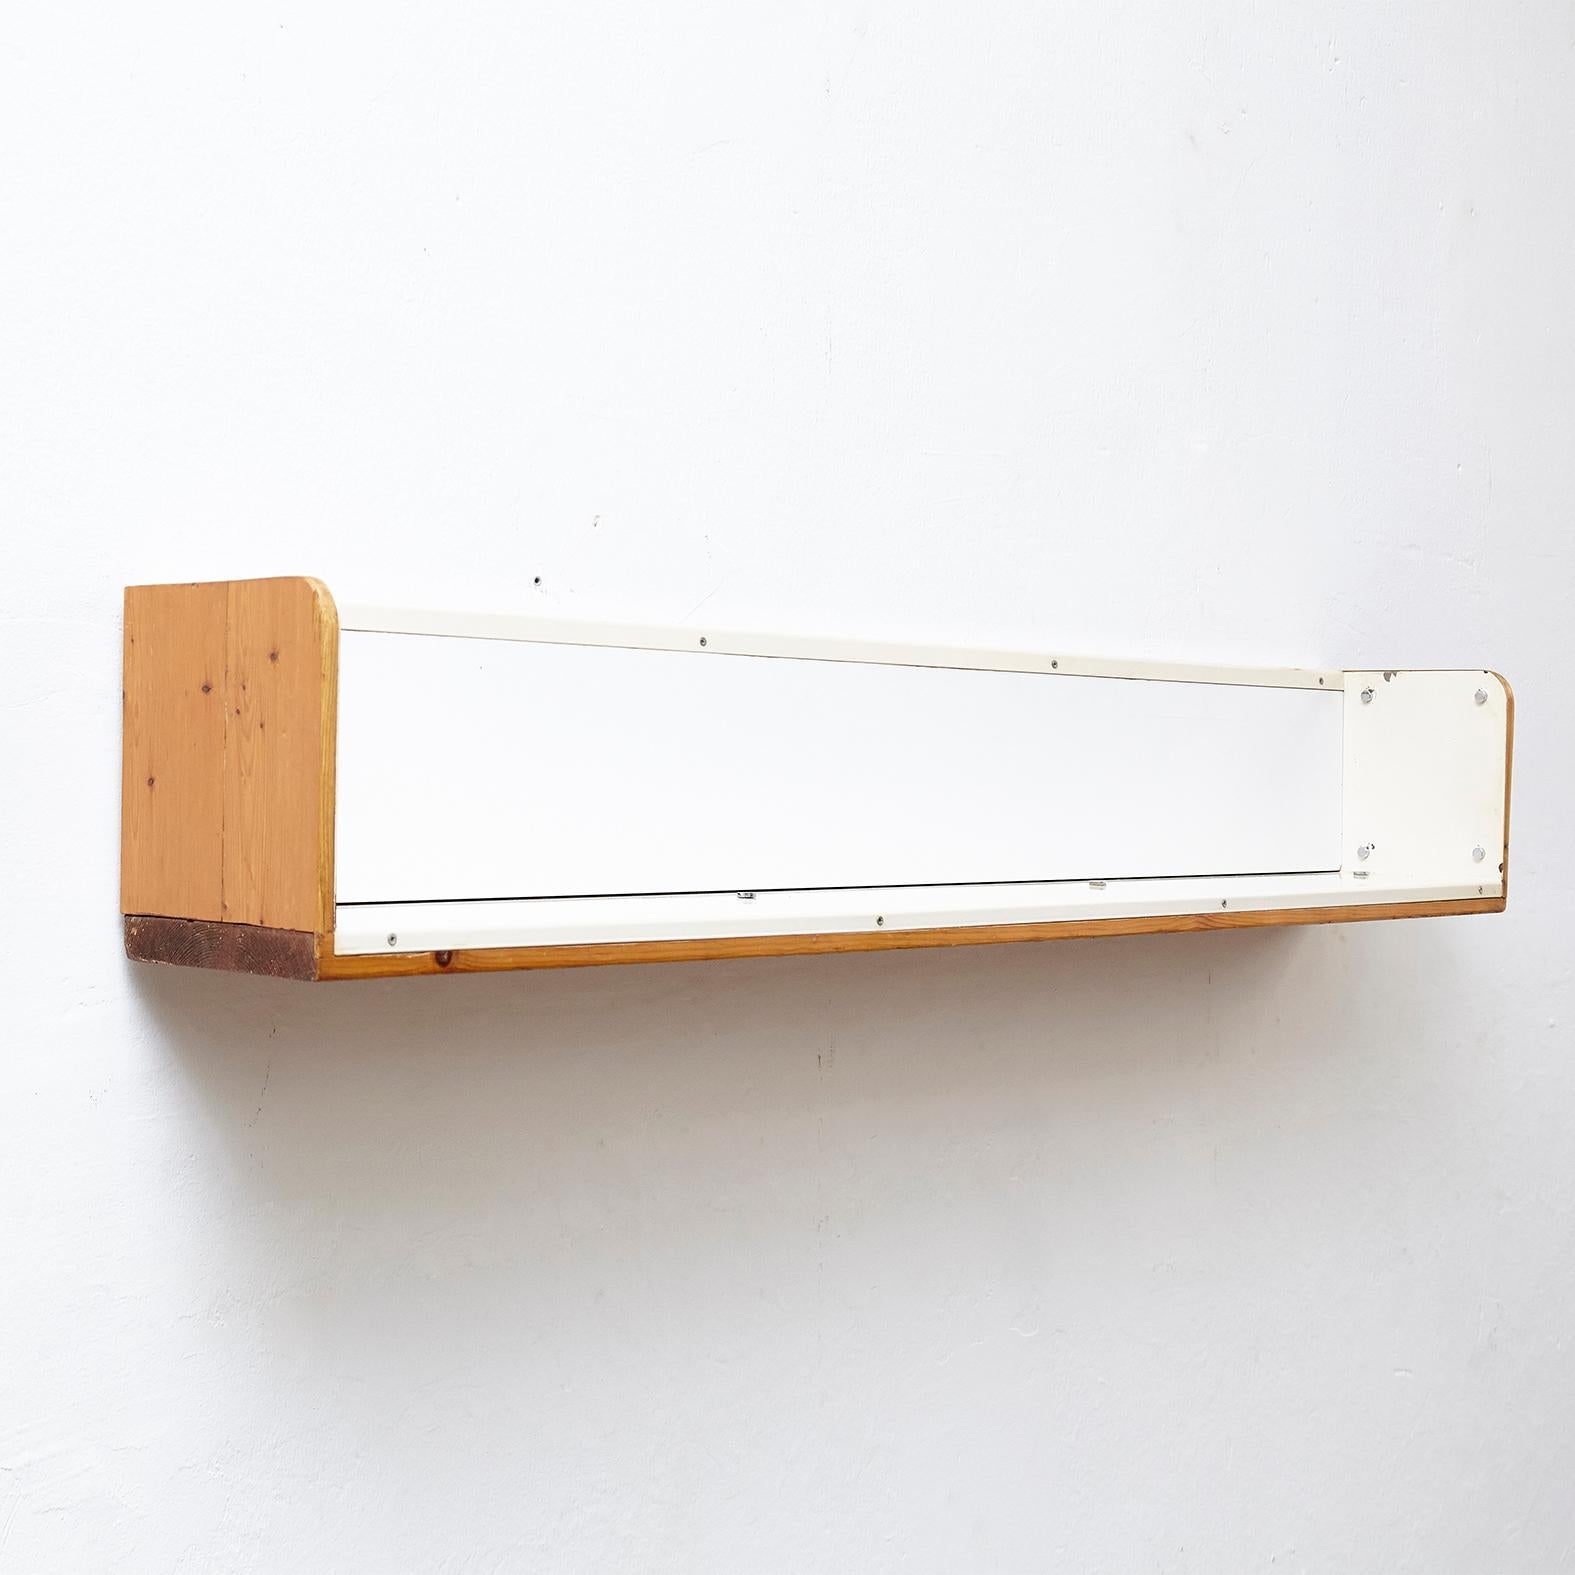 Shelves designed by Charlotte Perriand for Les Arcs, circa 1960, manufactured in France.
Pinewood and metal. 

In good original condition, with minor wear consistent with age and use, preserving a beautiful patina.

Charlotte Perriand